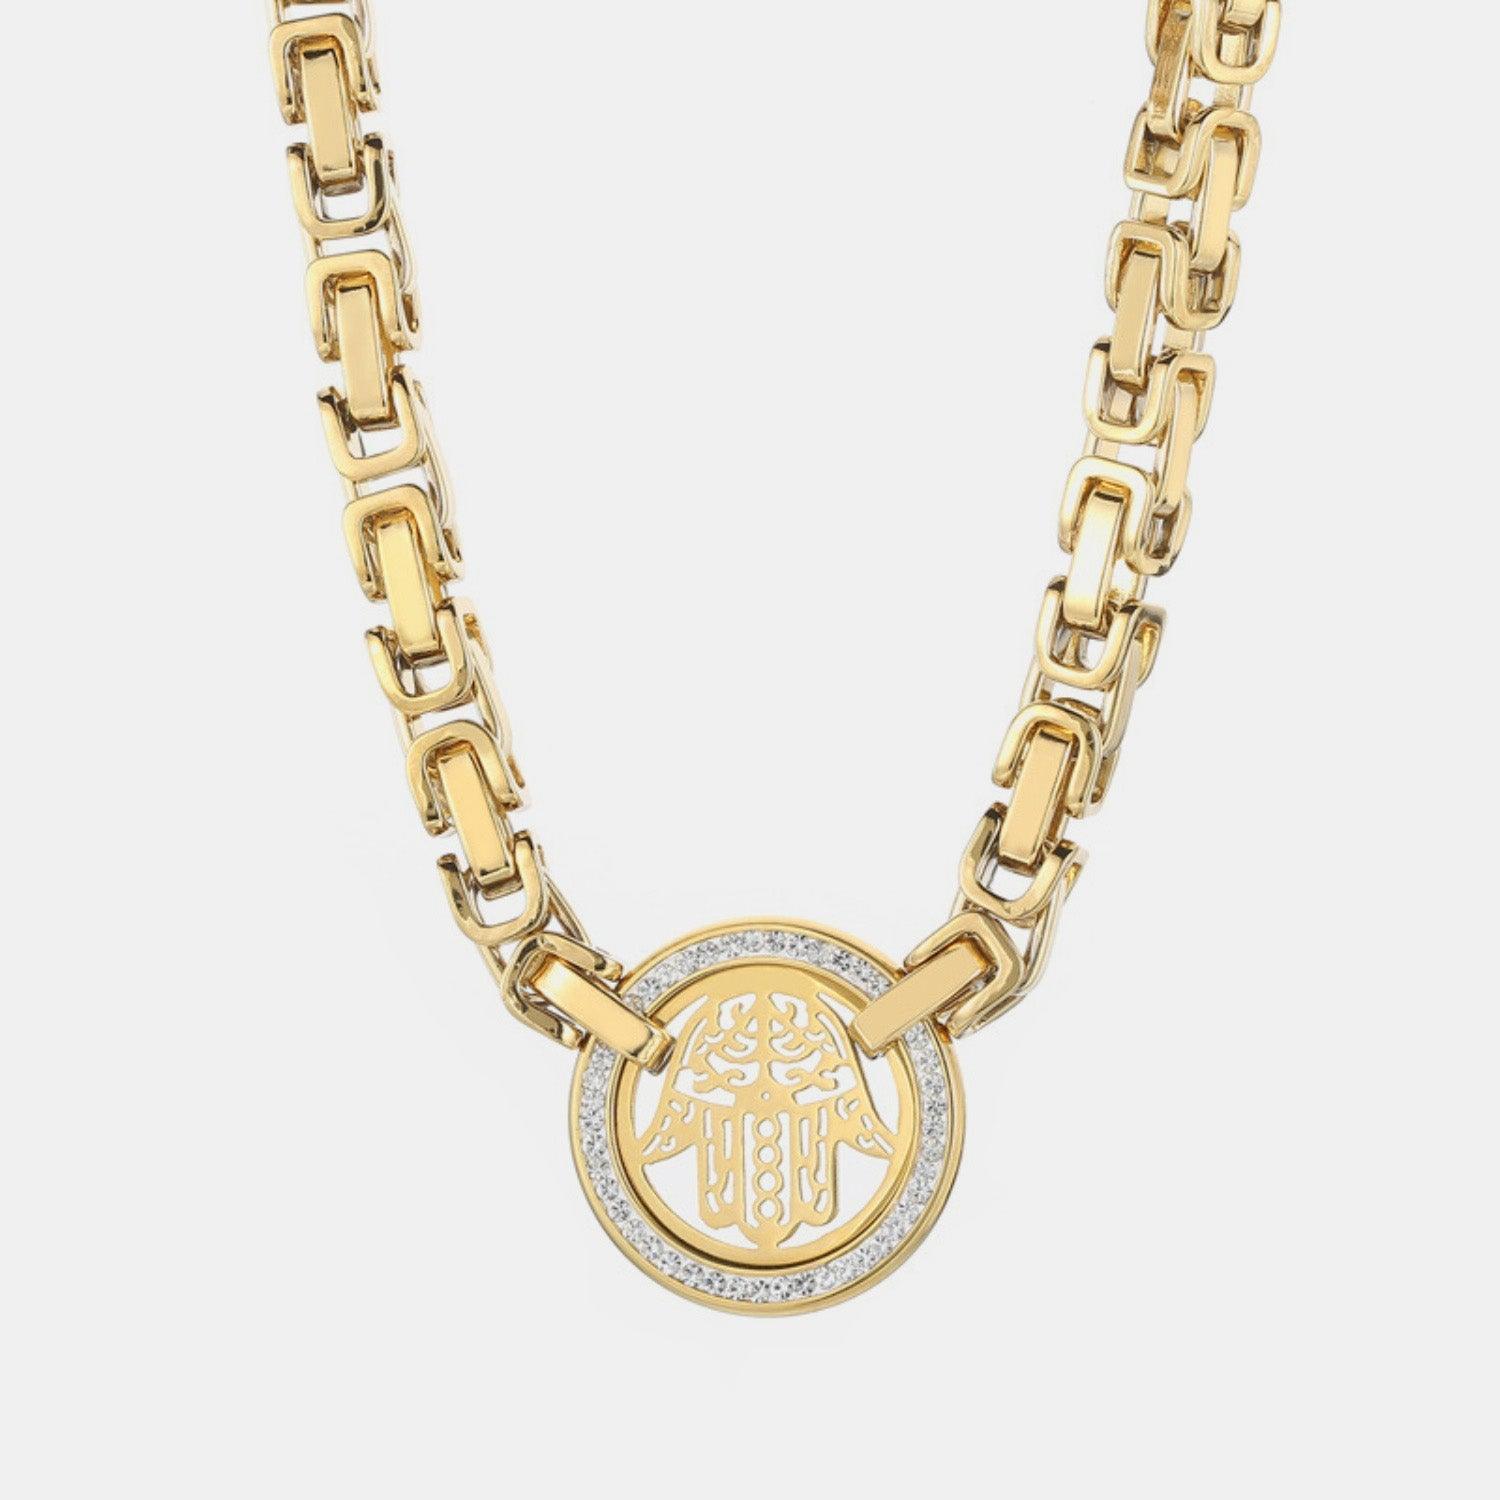 a gold necklace with an emblem on it